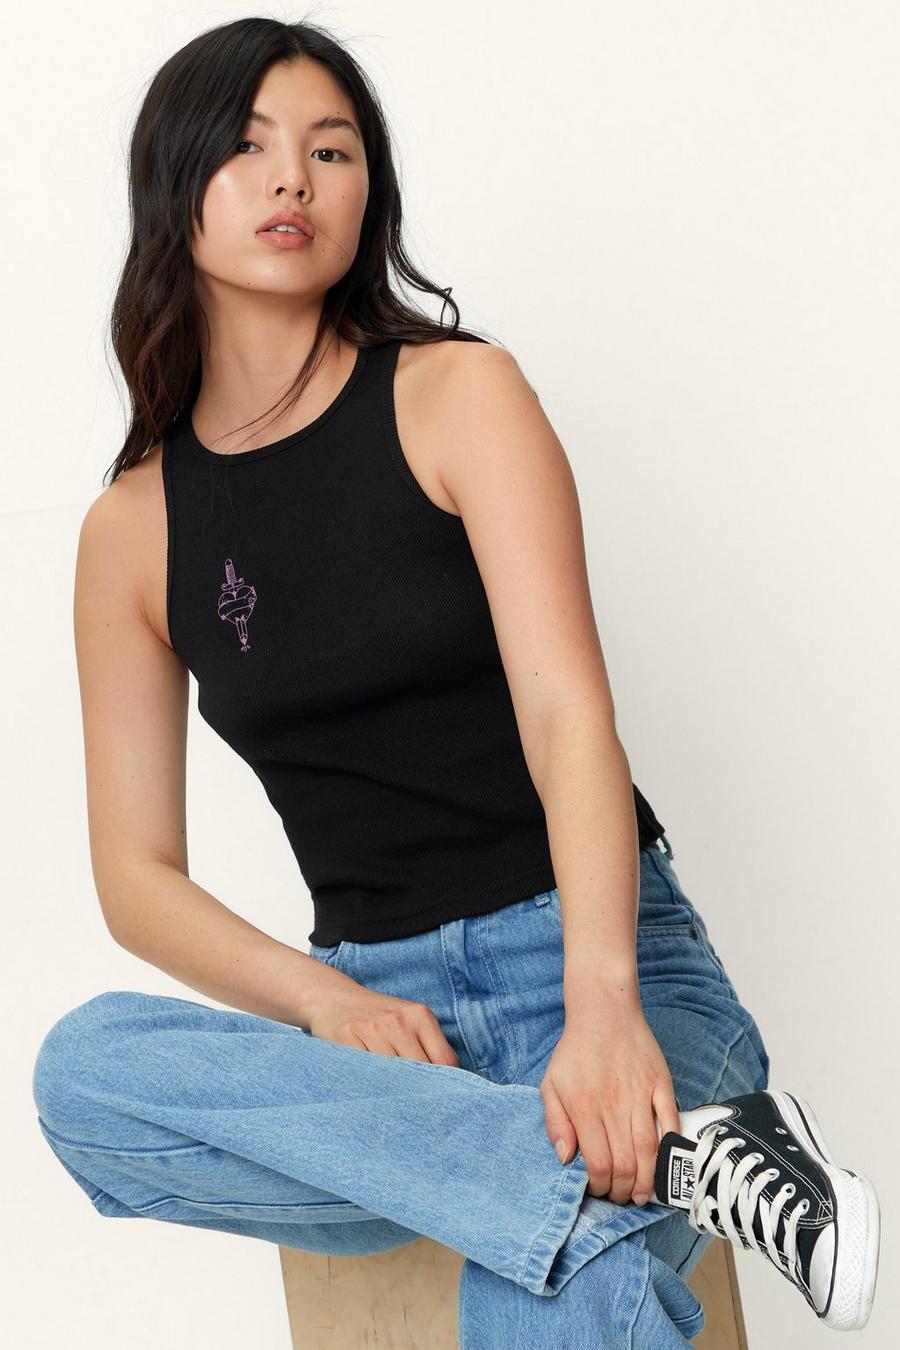 Heart and Dagger Graphic Racer Vest Top